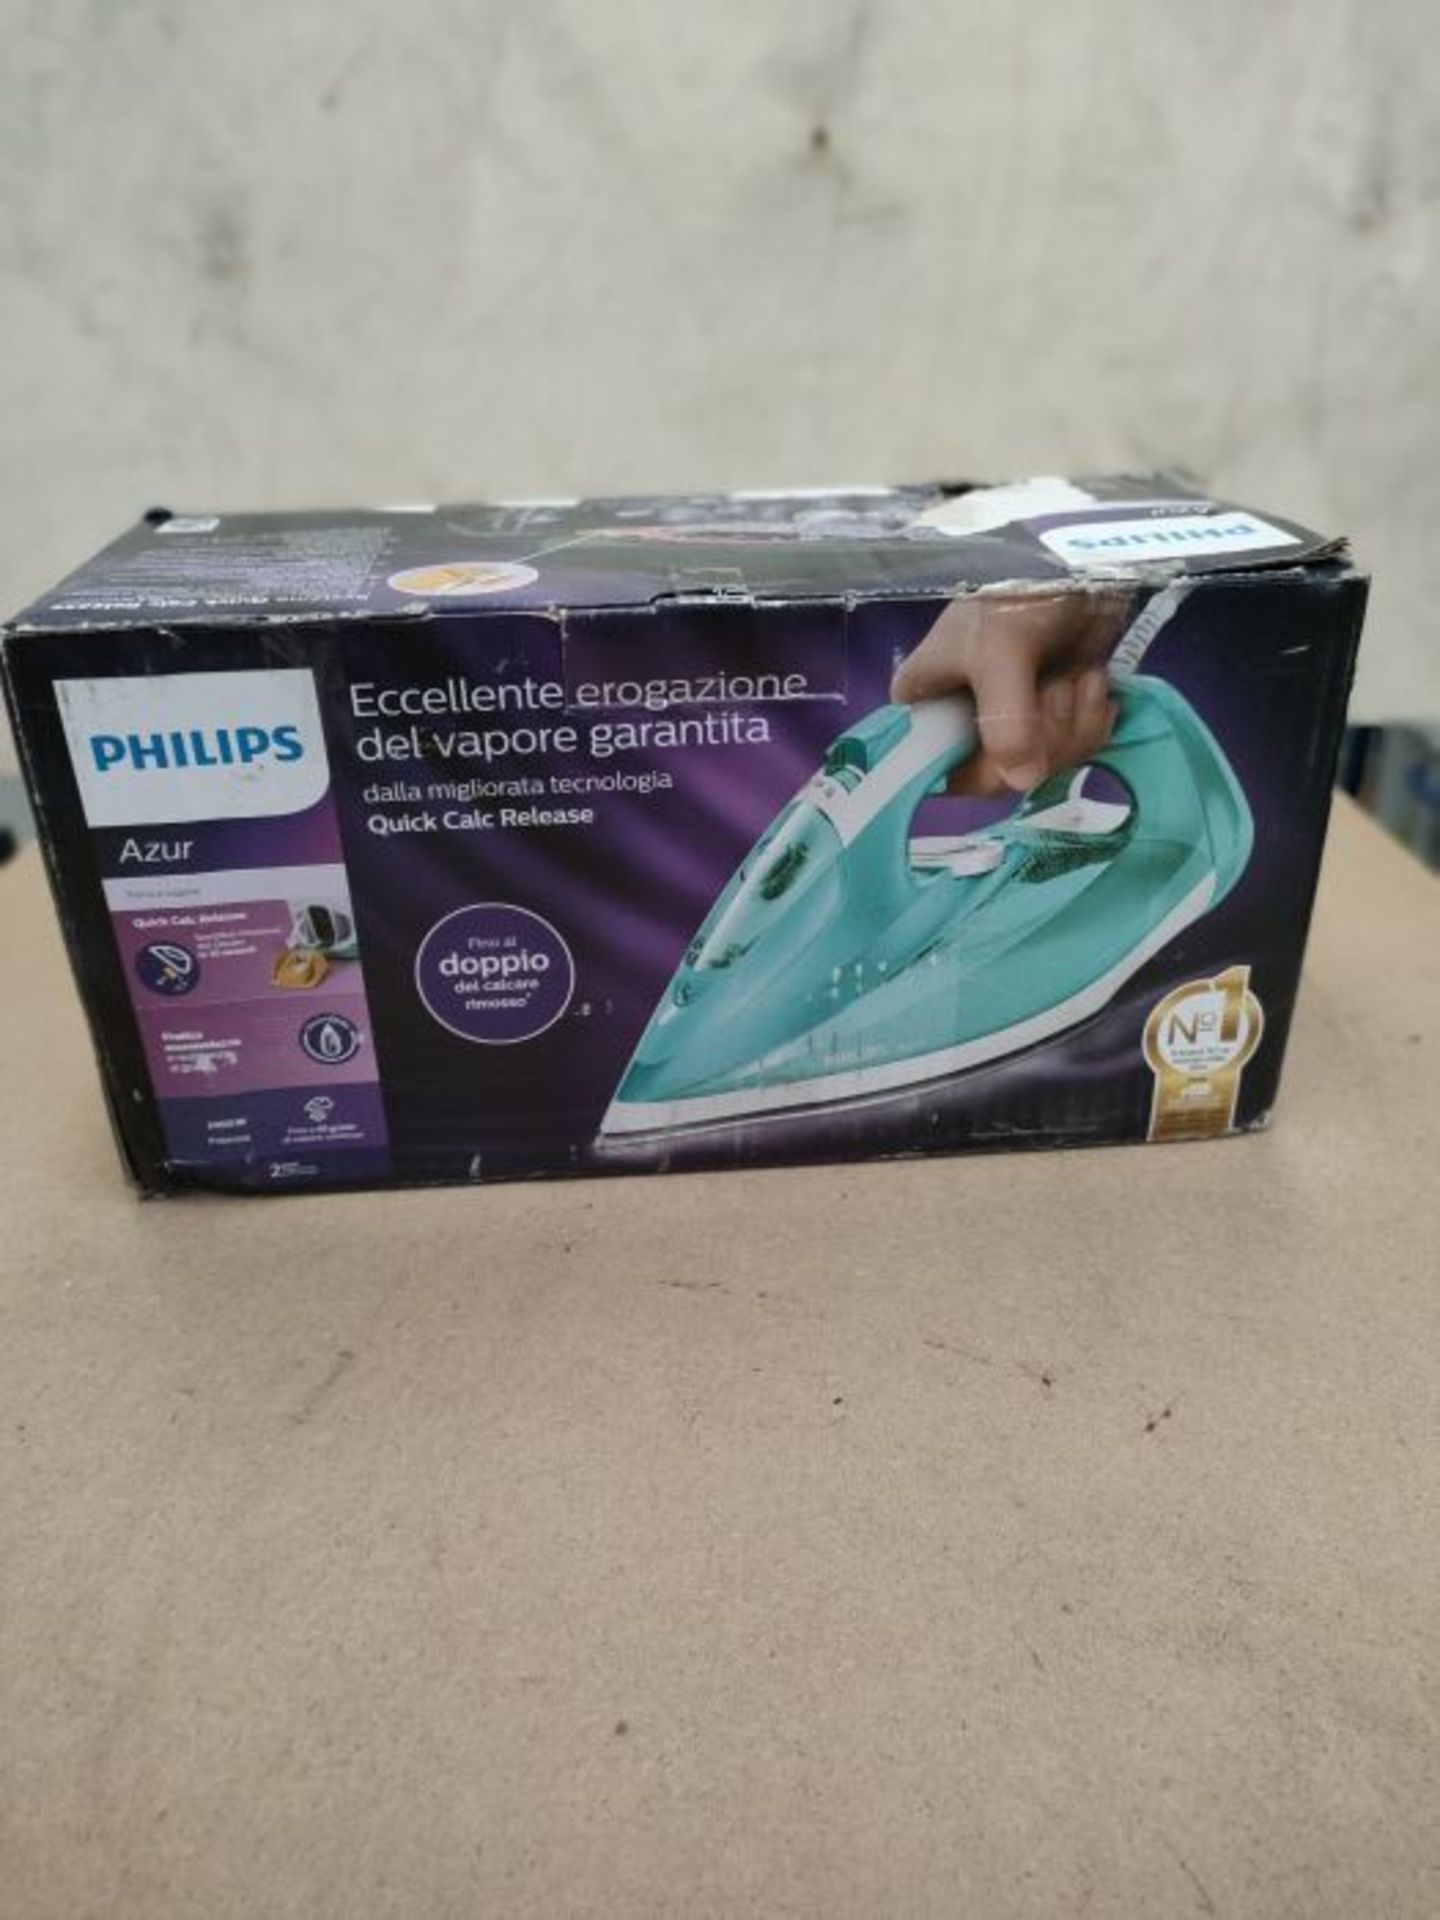 Philips Azur Steam Iron with SteamGlide Sole, 2 m, 200 g/min, Turquoise, 45 g/min - Image 2 of 3